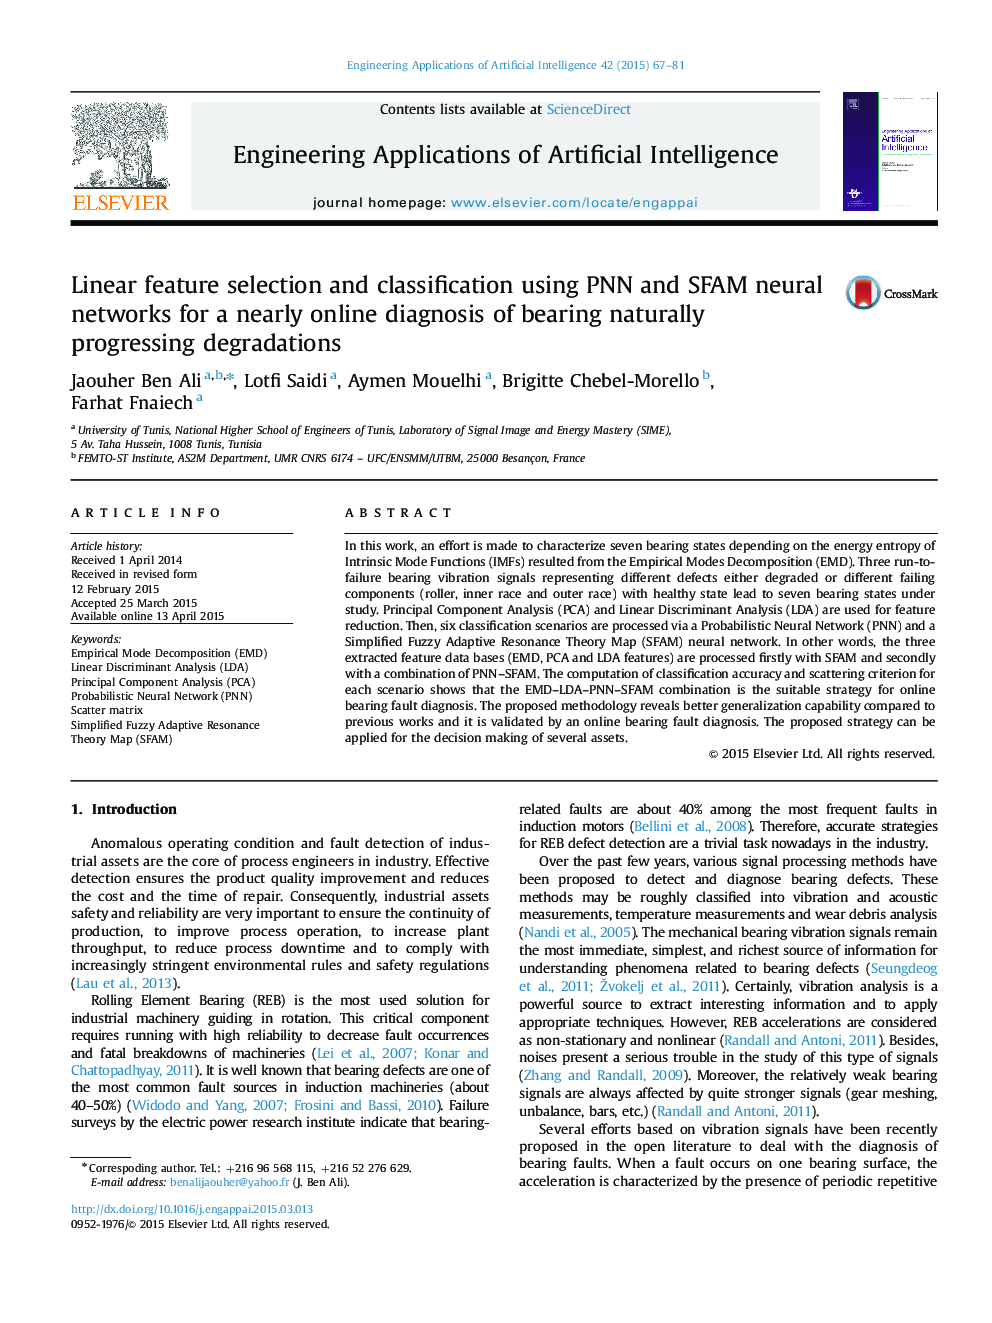 Linear feature selection and classification using PNN and SFAM neural networks for a nearly online diagnosis of bearing naturally progressing degradations